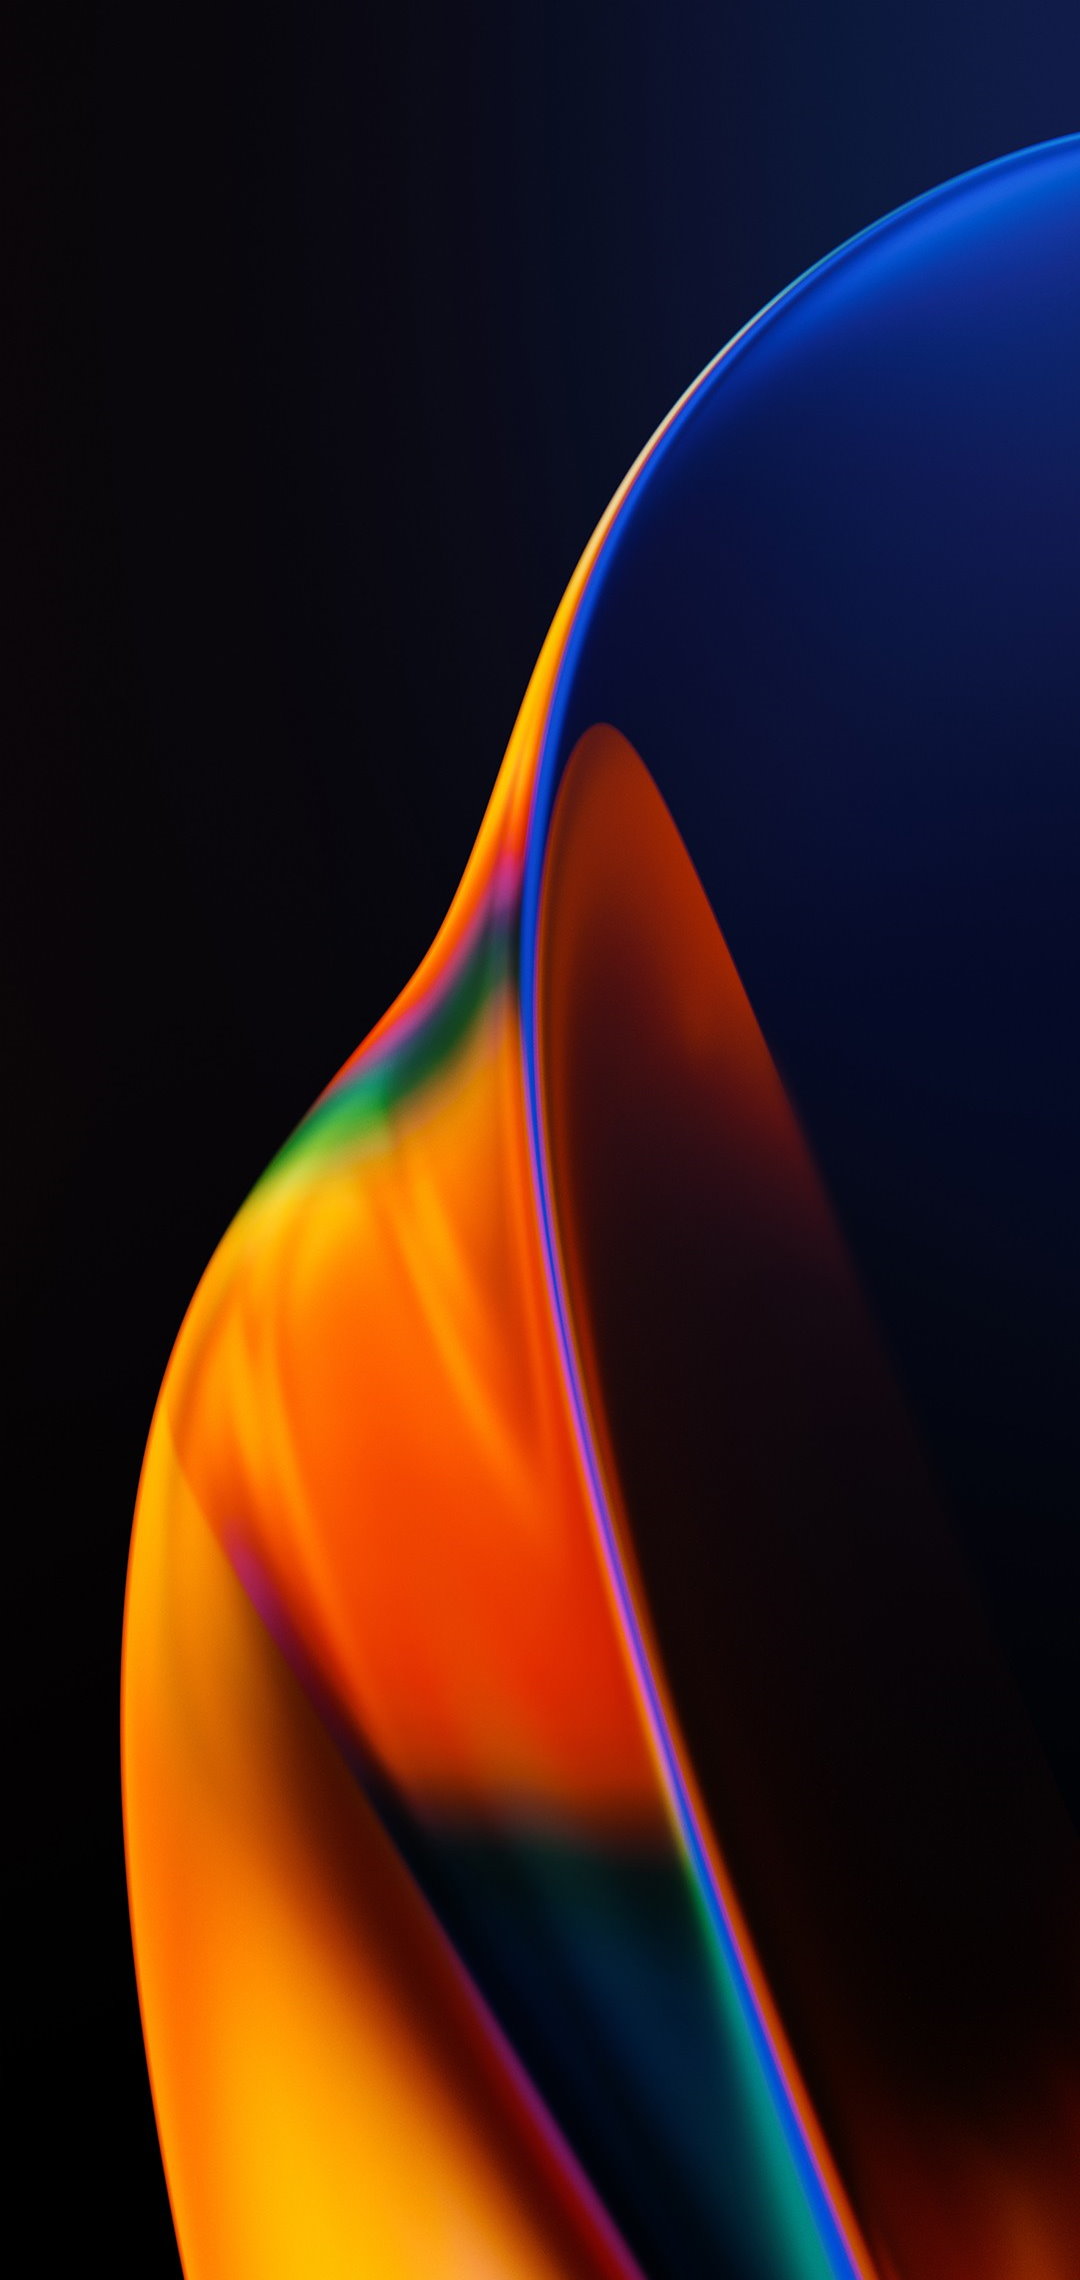 Wallpapers Samsung Galaxy Note 10 - Pack 1 - WallsPhone